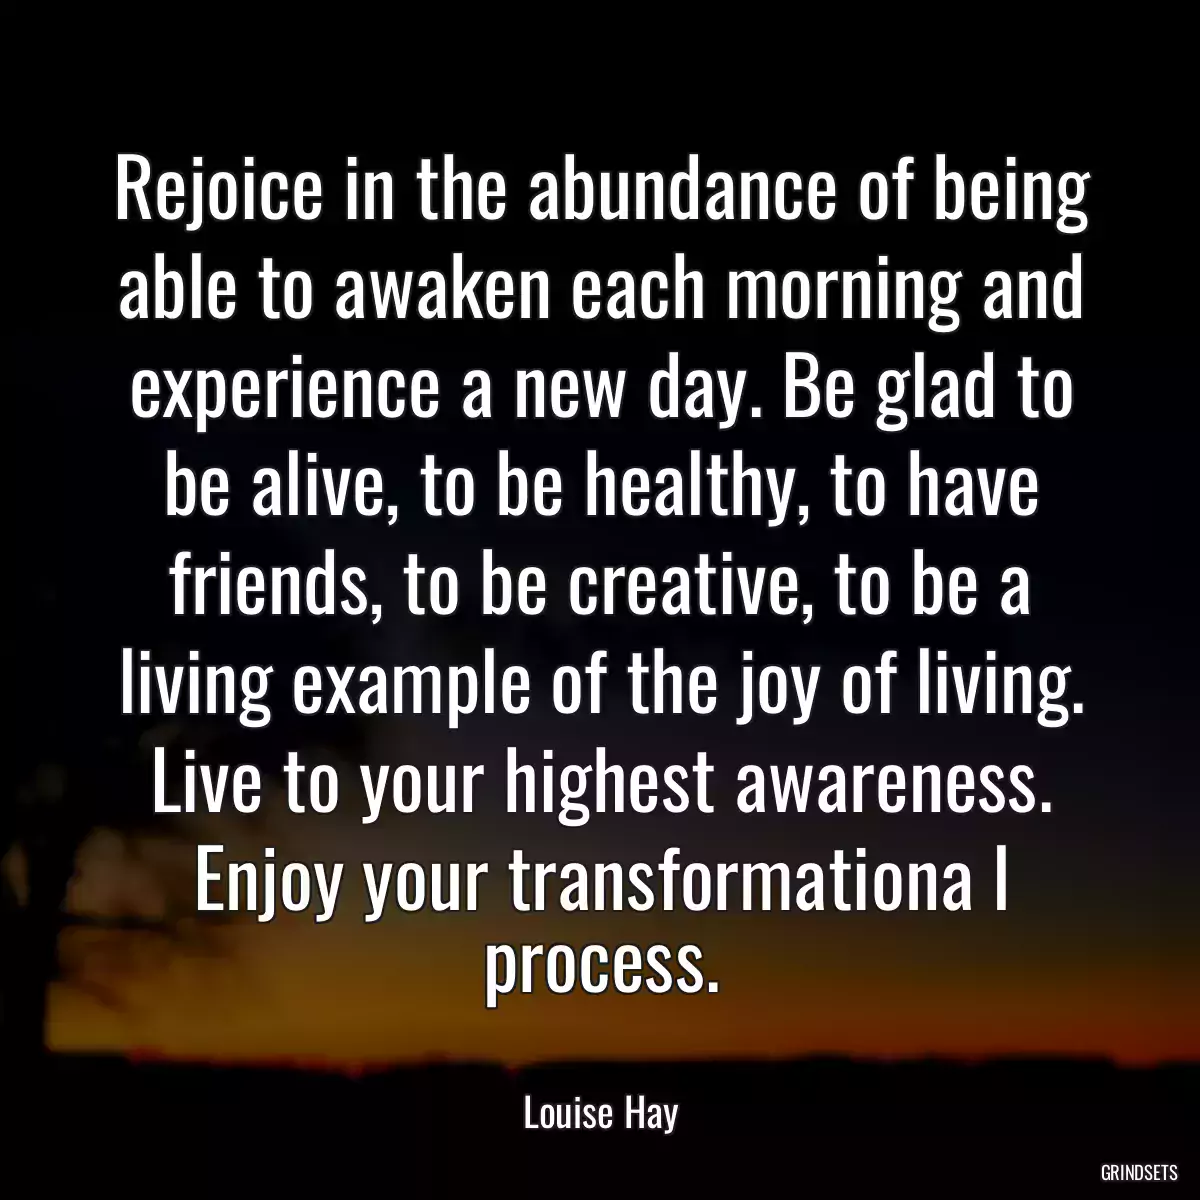 Rejoice in the abundance of being able to awaken each morning and experience a new day. Be glad to be alive, to be healthy, to have friends, to be creative, to be a living example of the joy of living. Live to your highest awareness. Enjoy your transformationa l process.